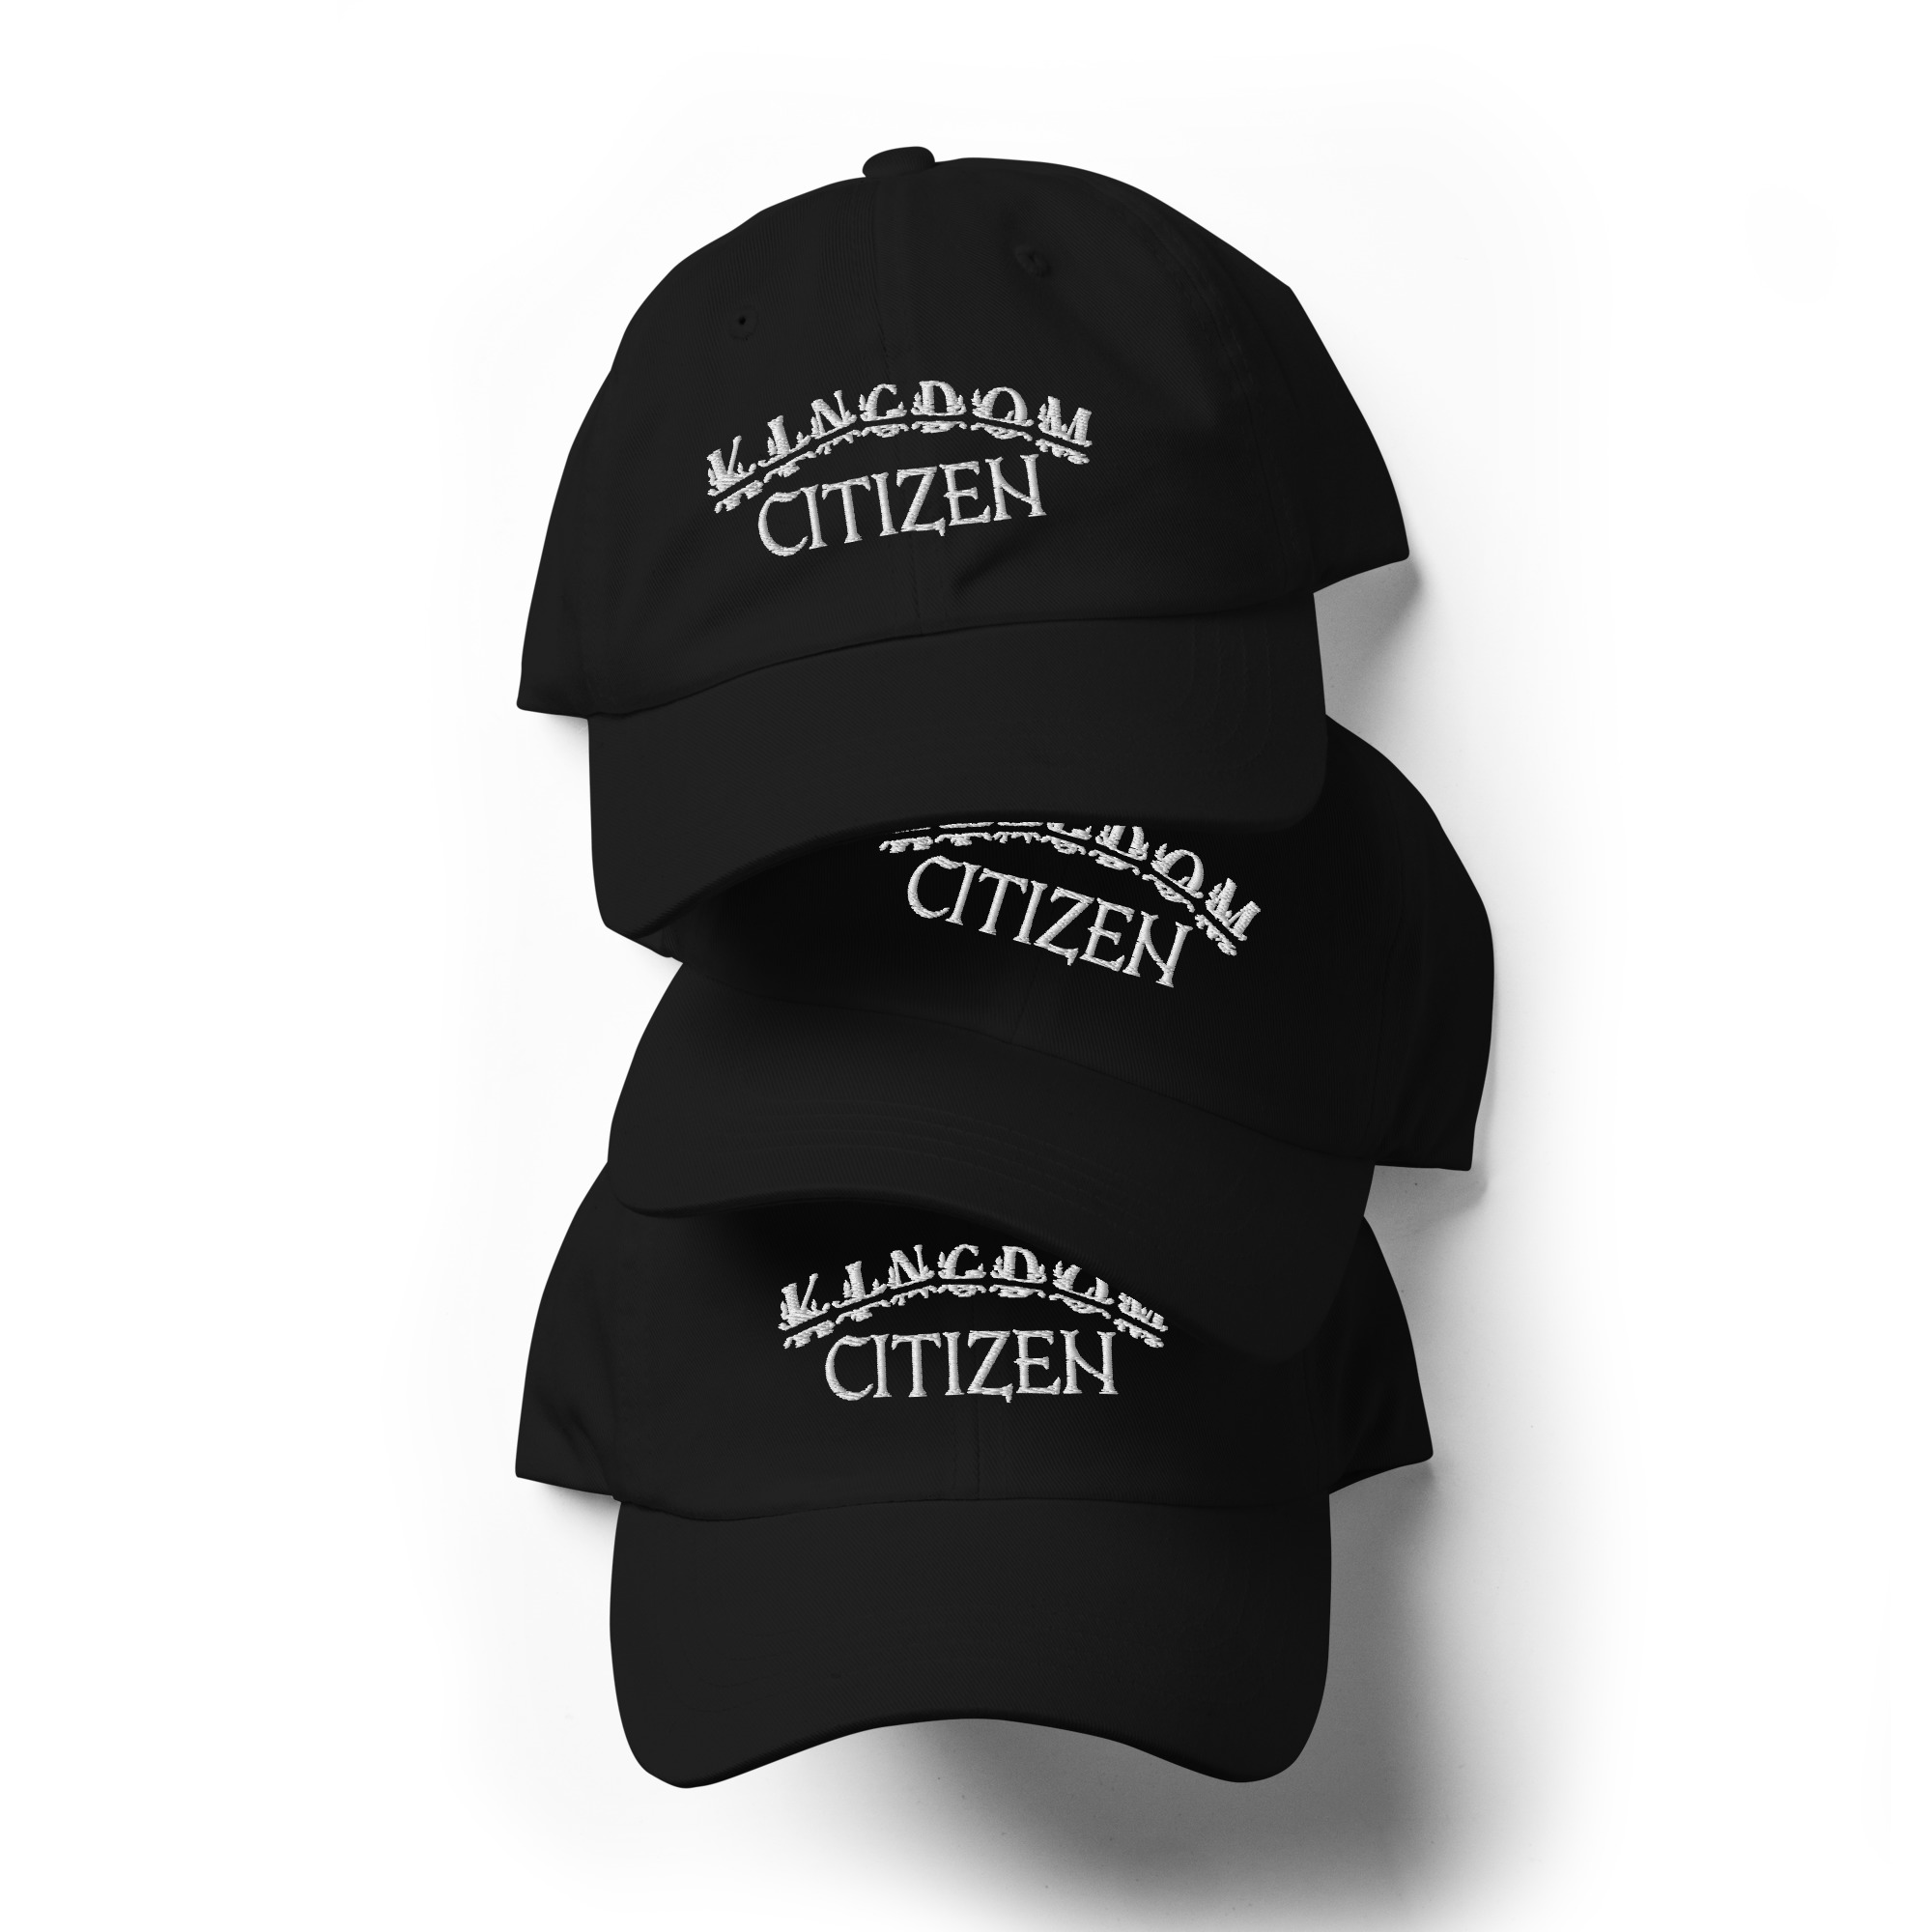 Faith apparel black hat displays "Kingdom Citizen" in white embroidery